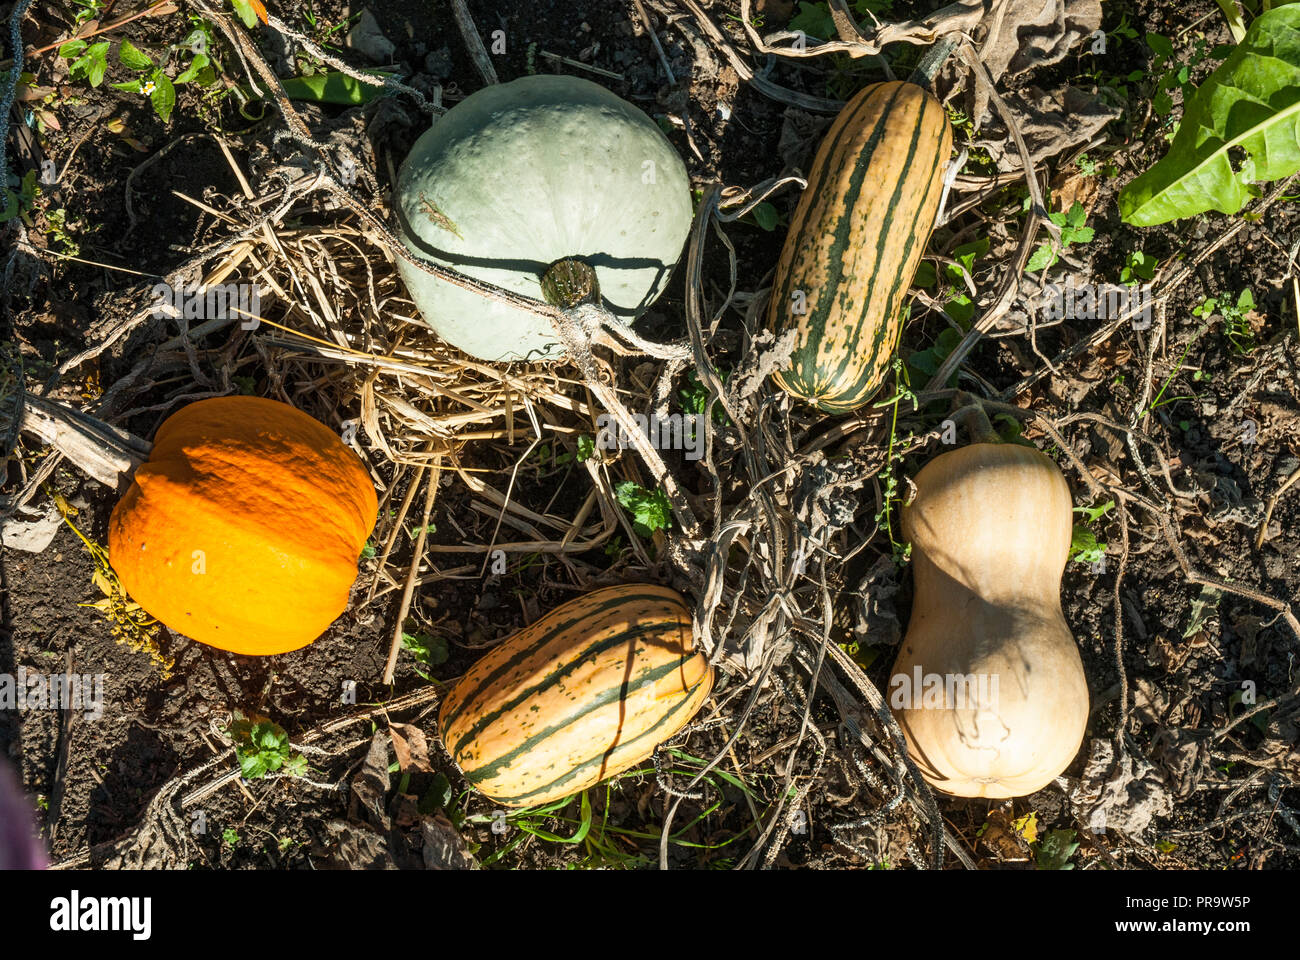 Various squash and pumpkin, different shapes and bright colours, growing on the ground. Autumn vegetables Stock Photo